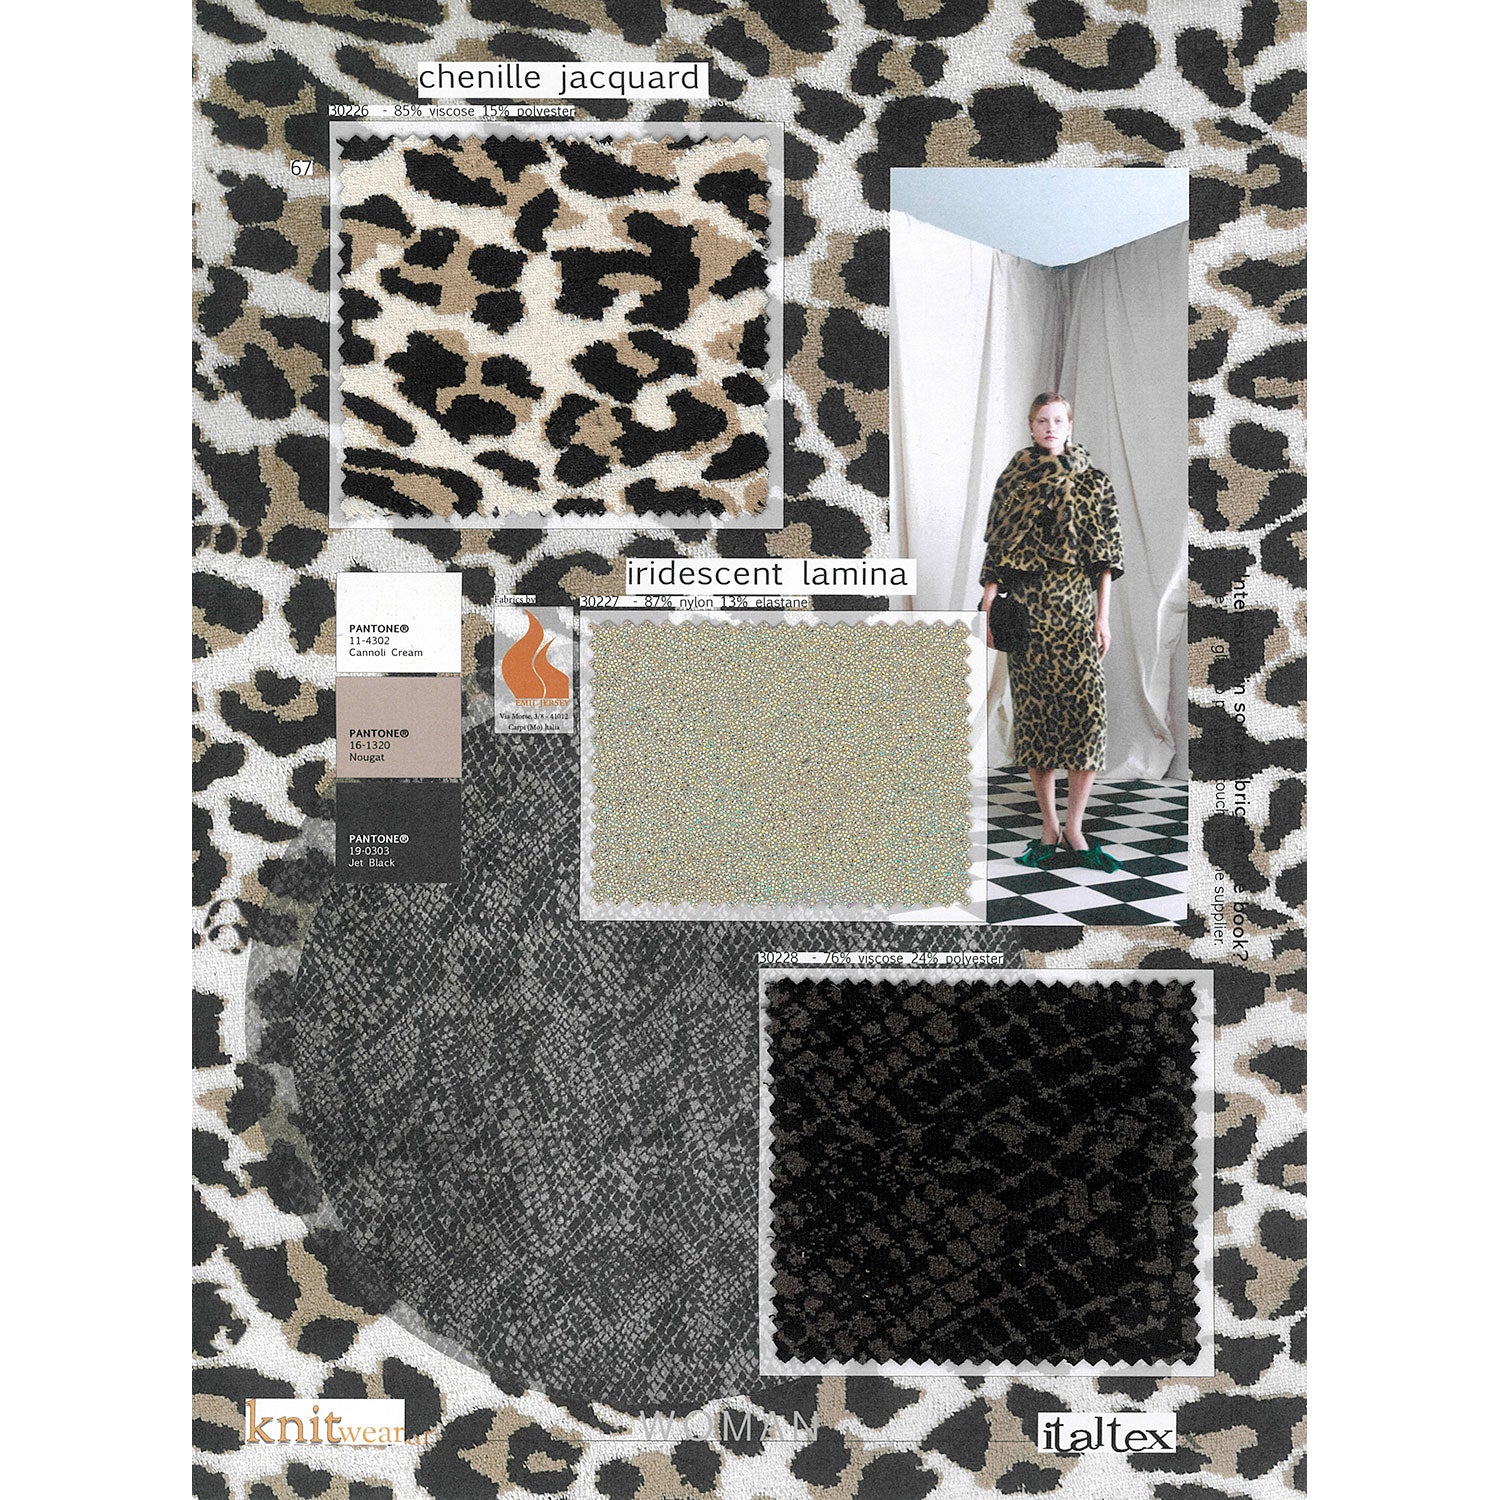 Three knitted fabric swatches for women's wear. One spotted leopard animalier in chenille jacquard. A jersey with iridescent lamina coating. A tone on tone reptile skin jersey